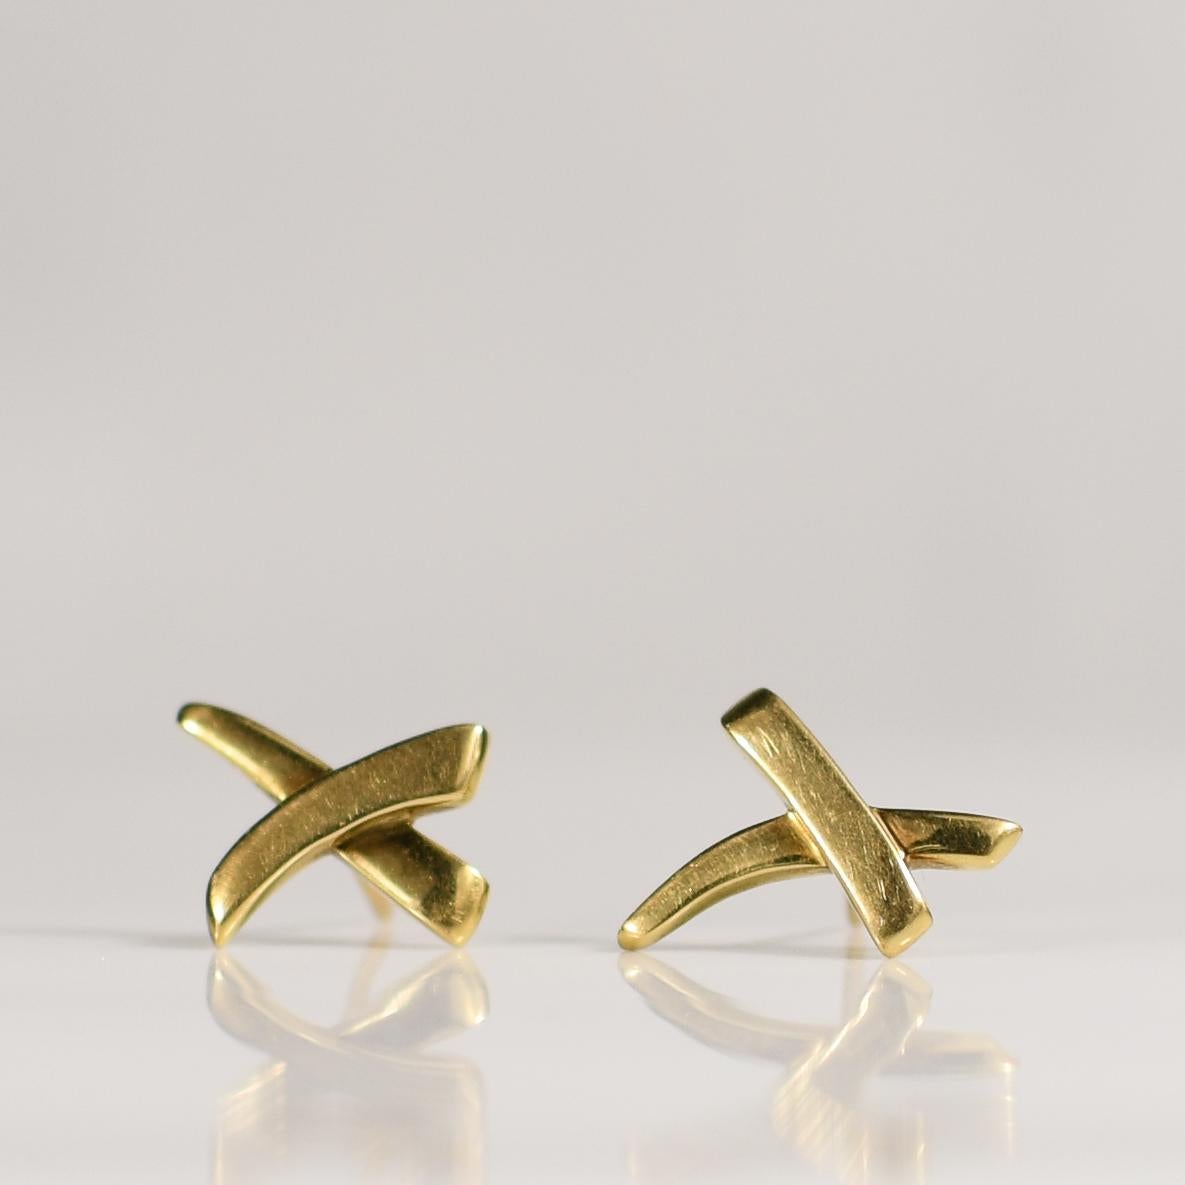 Make a bold statement with these Paloma Picasso x Graffiti 18K yellow gold earrings from Tiffany & Co., weighing 3.19 grams. Designed by the renowned artist Paloma Picasso, these earrings exude edgy sophistication with their graffiti-inspired motif.